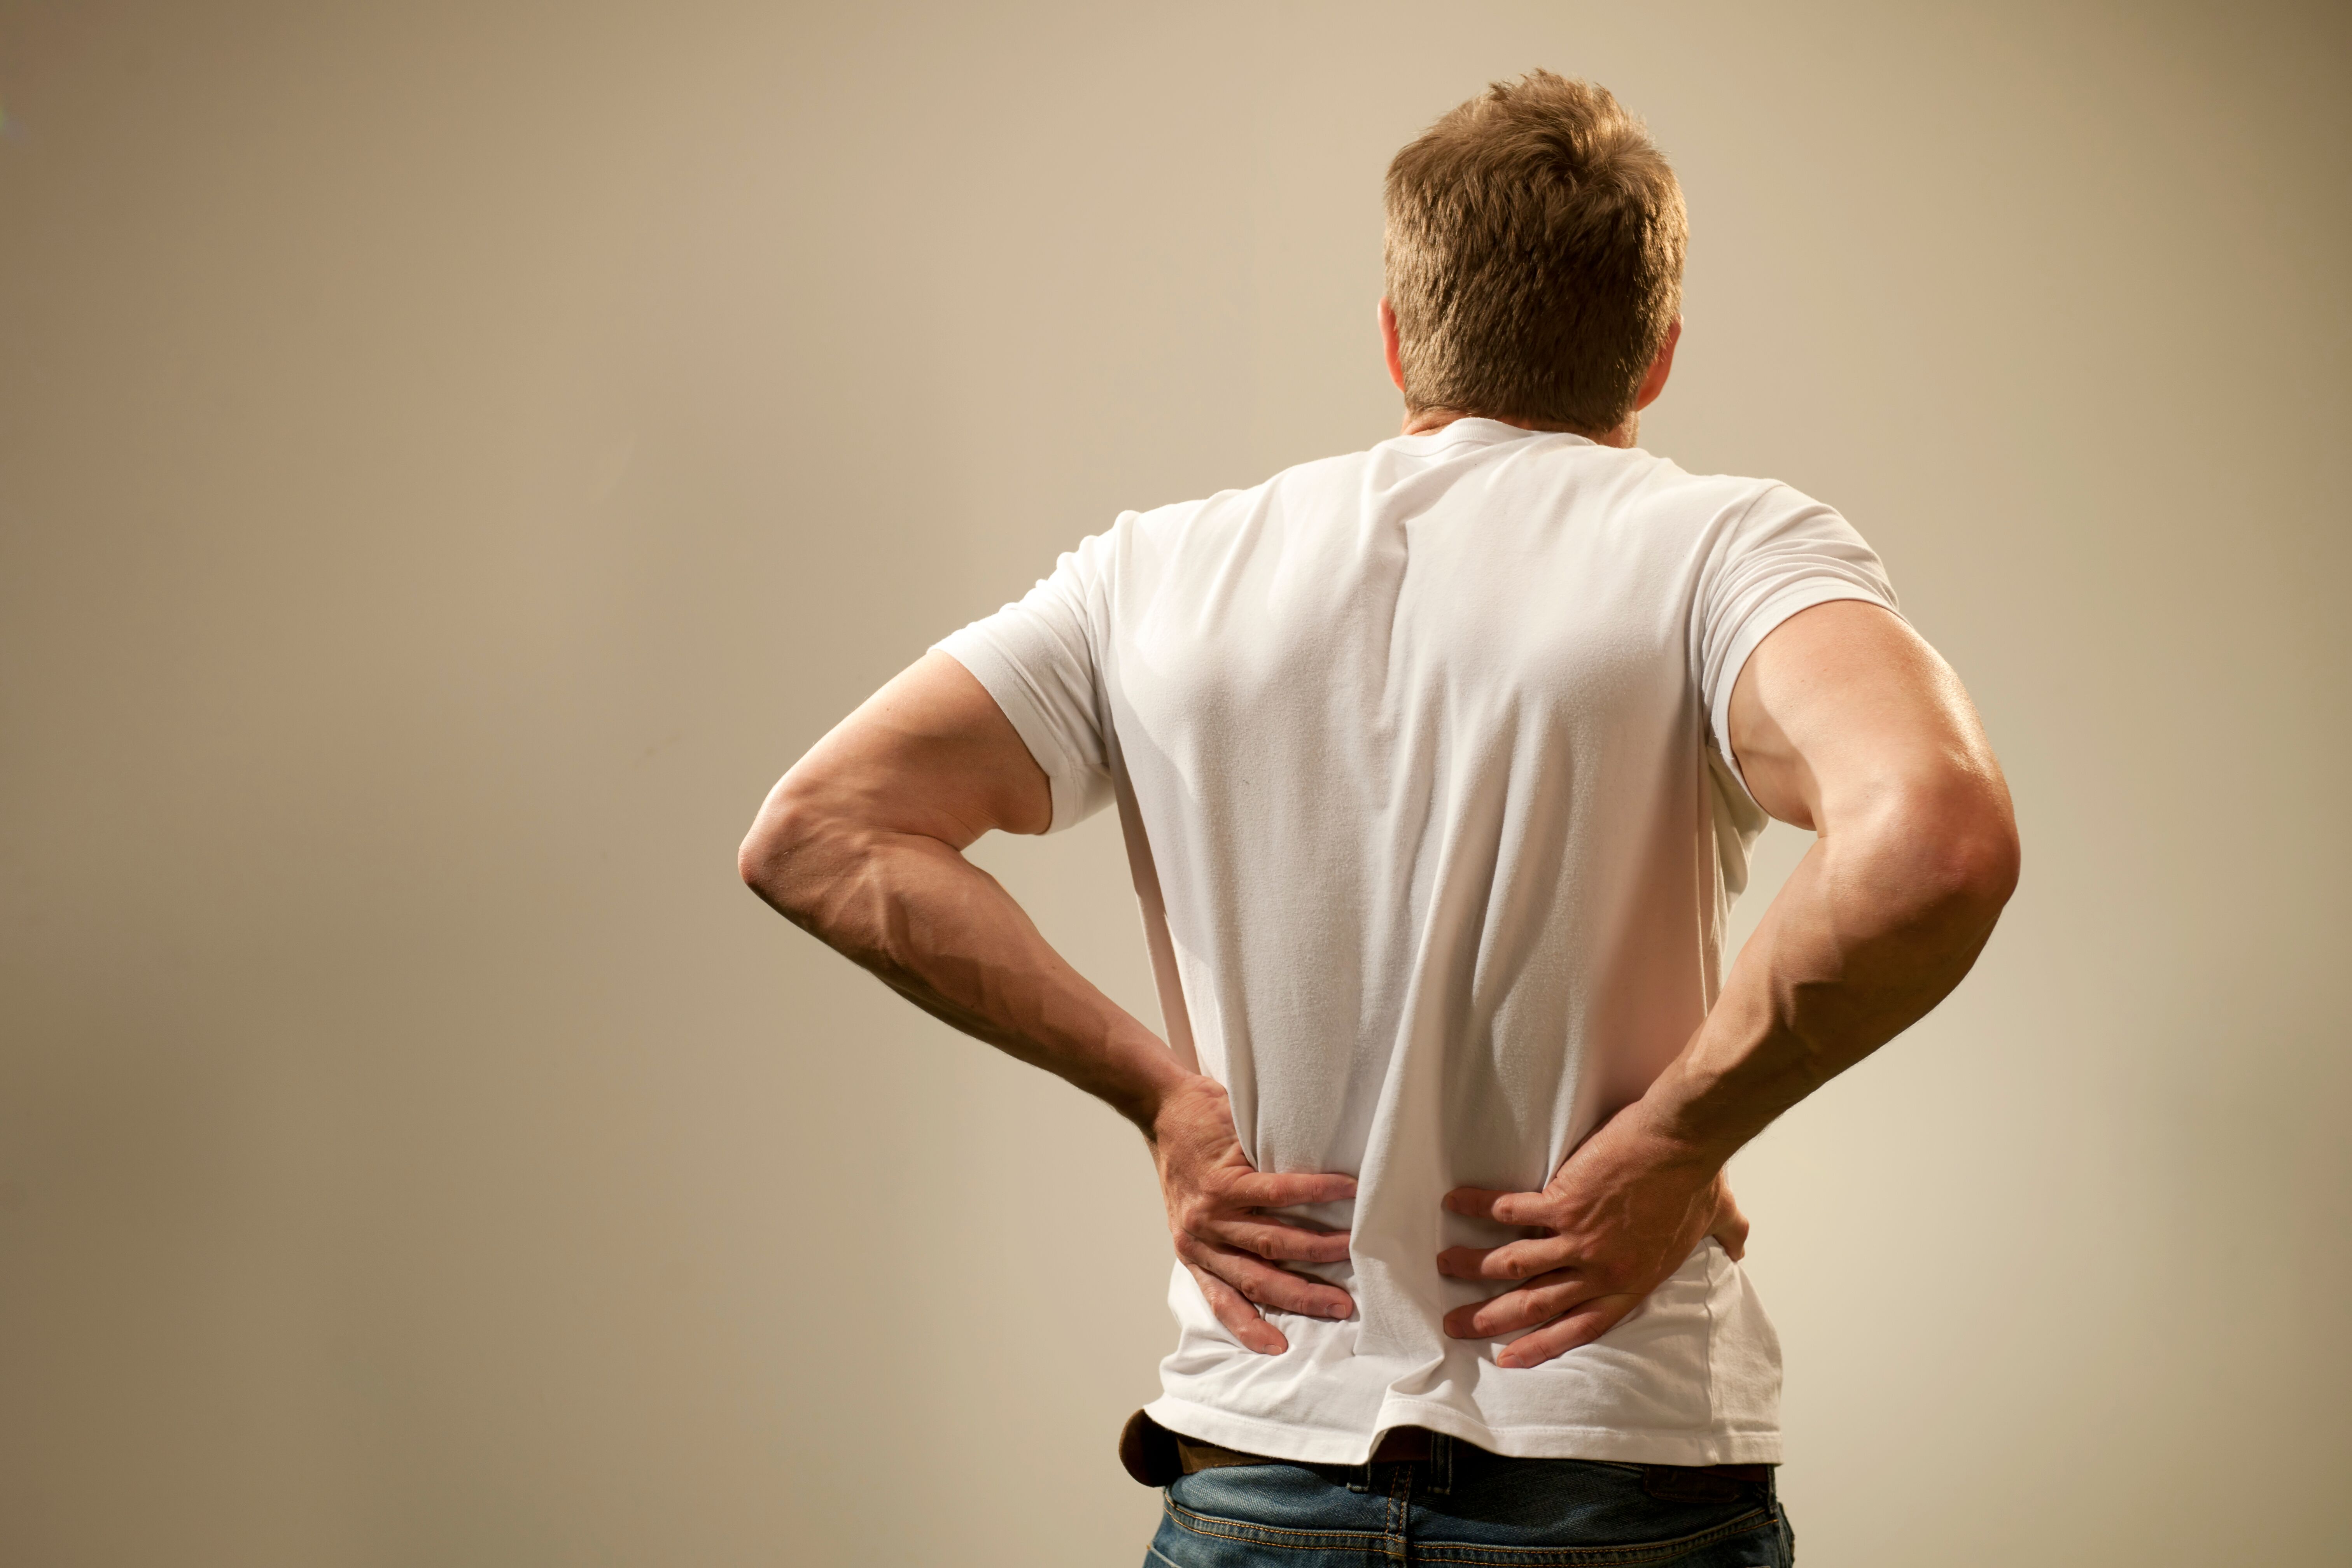 What You Need To Know About Back and Neck Injuries